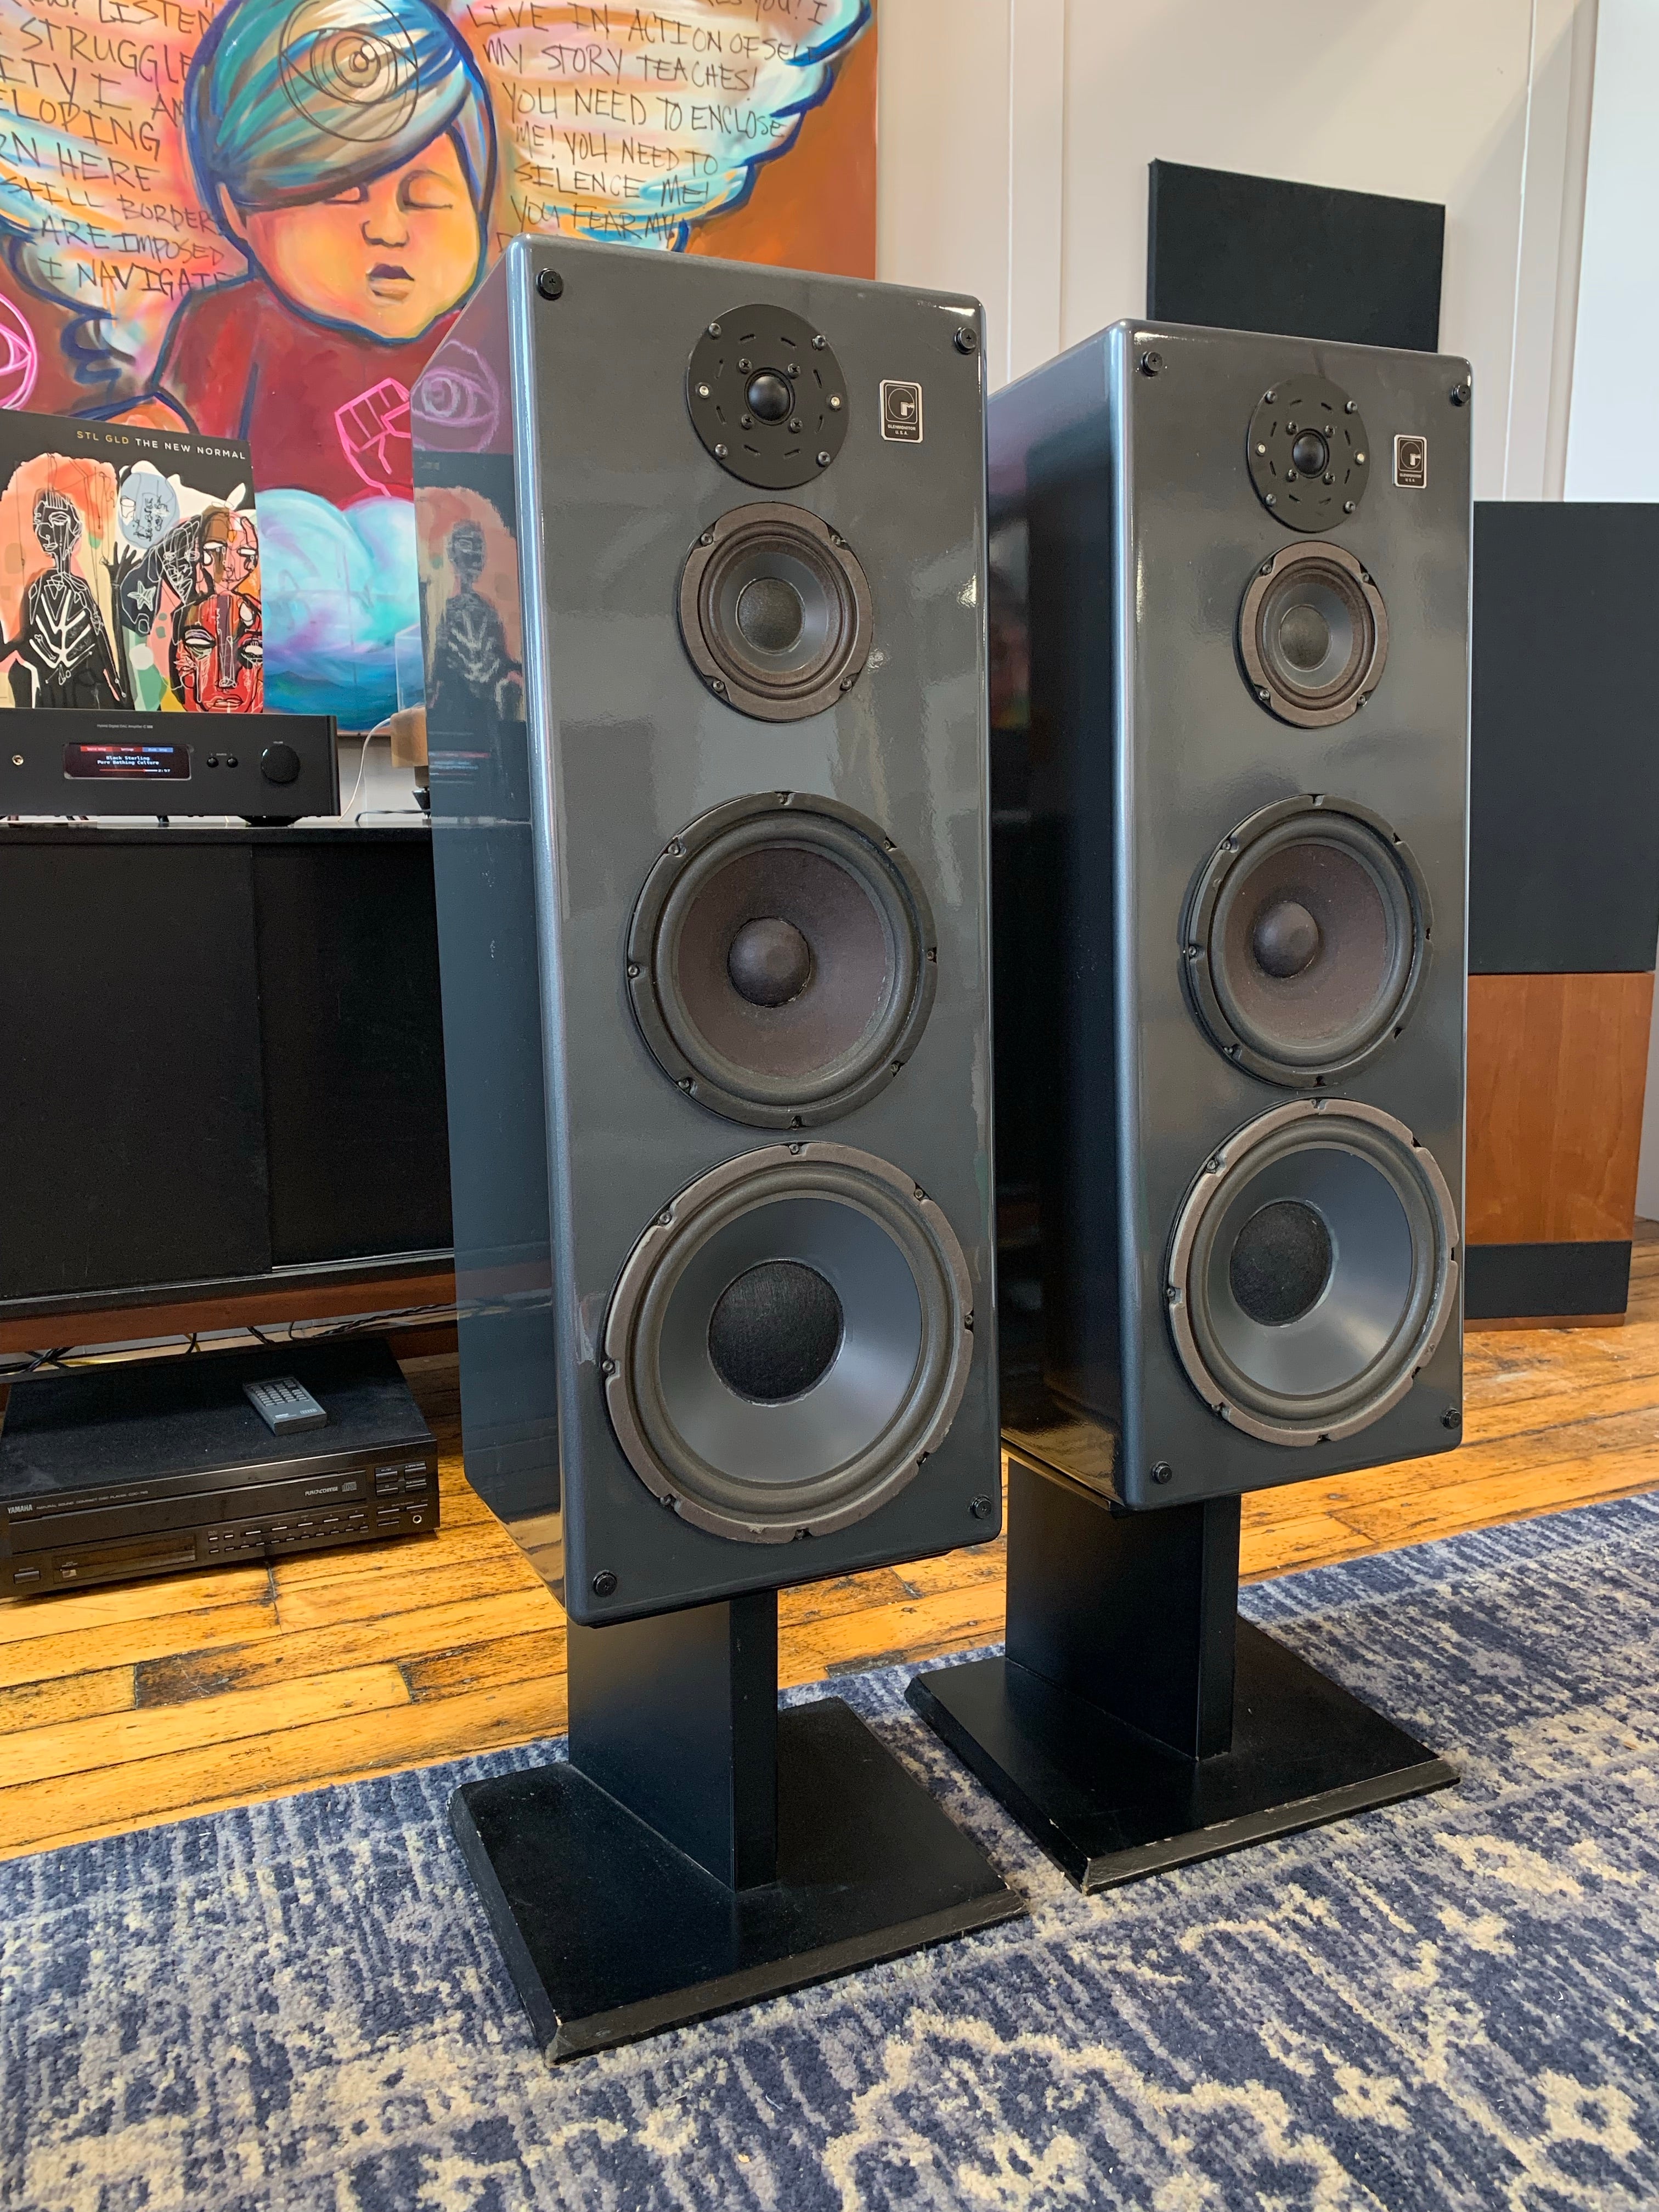 Glenmonitor Double Eight Series II Tower Speakers - SOLD